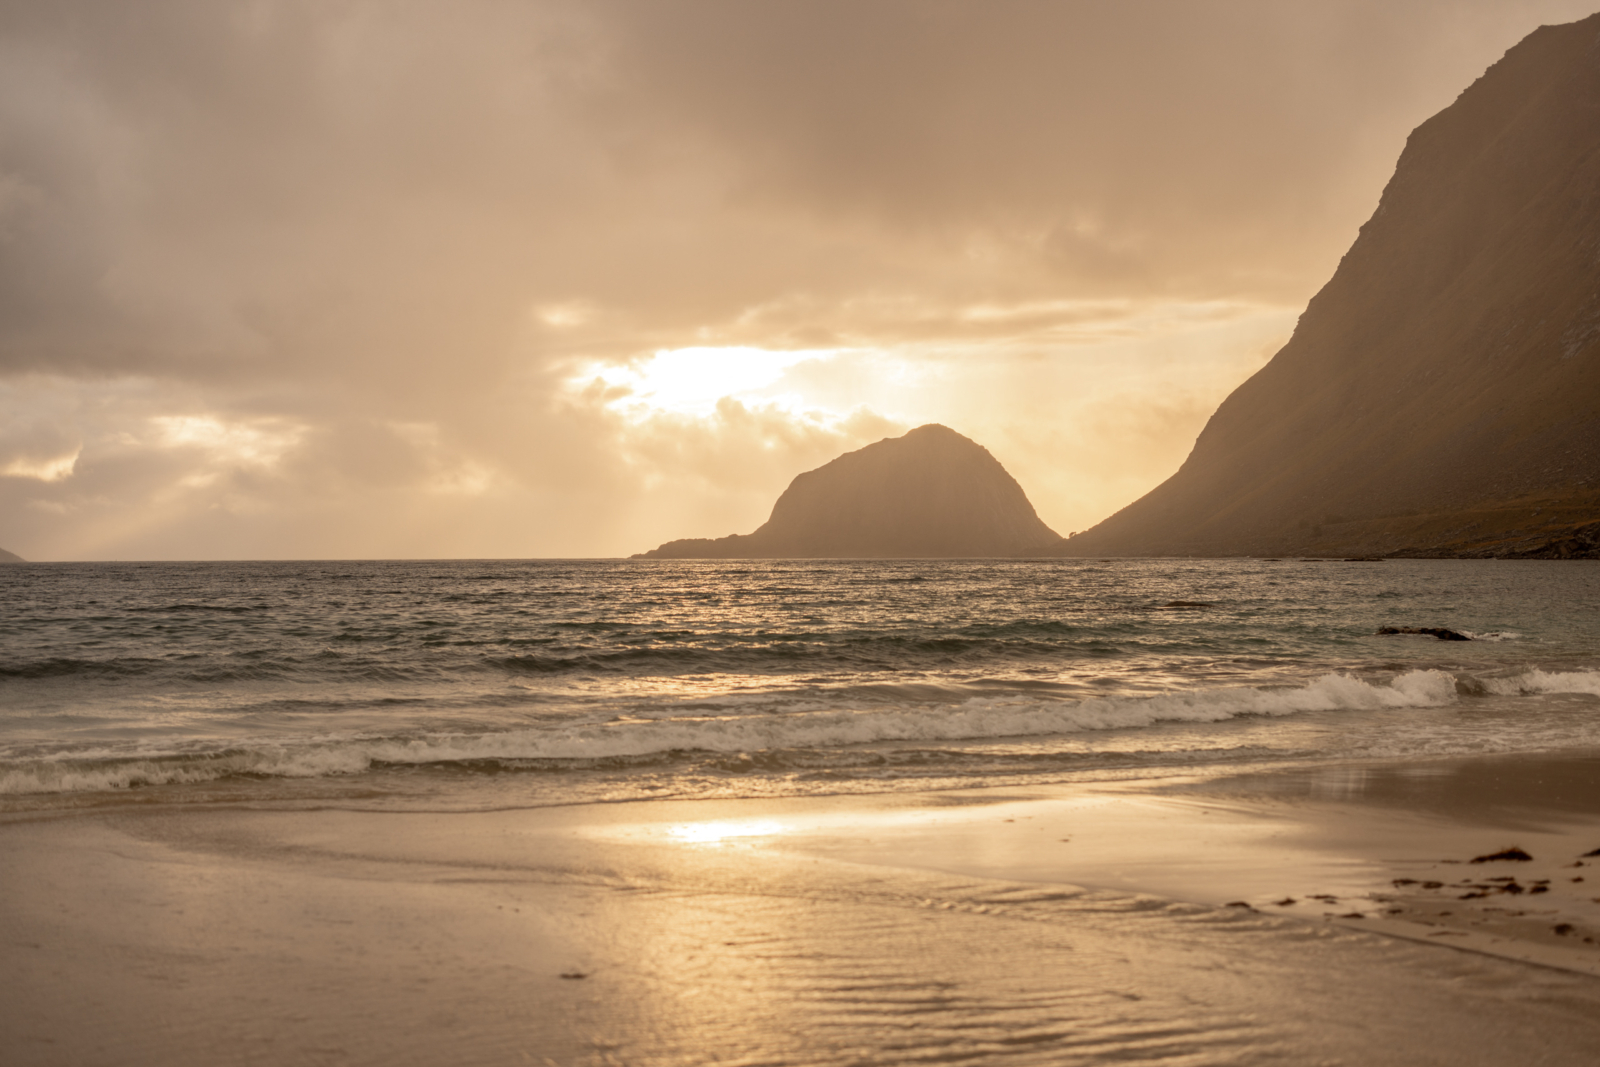 Sunset at the beach on the Lofoten Islands in Norway